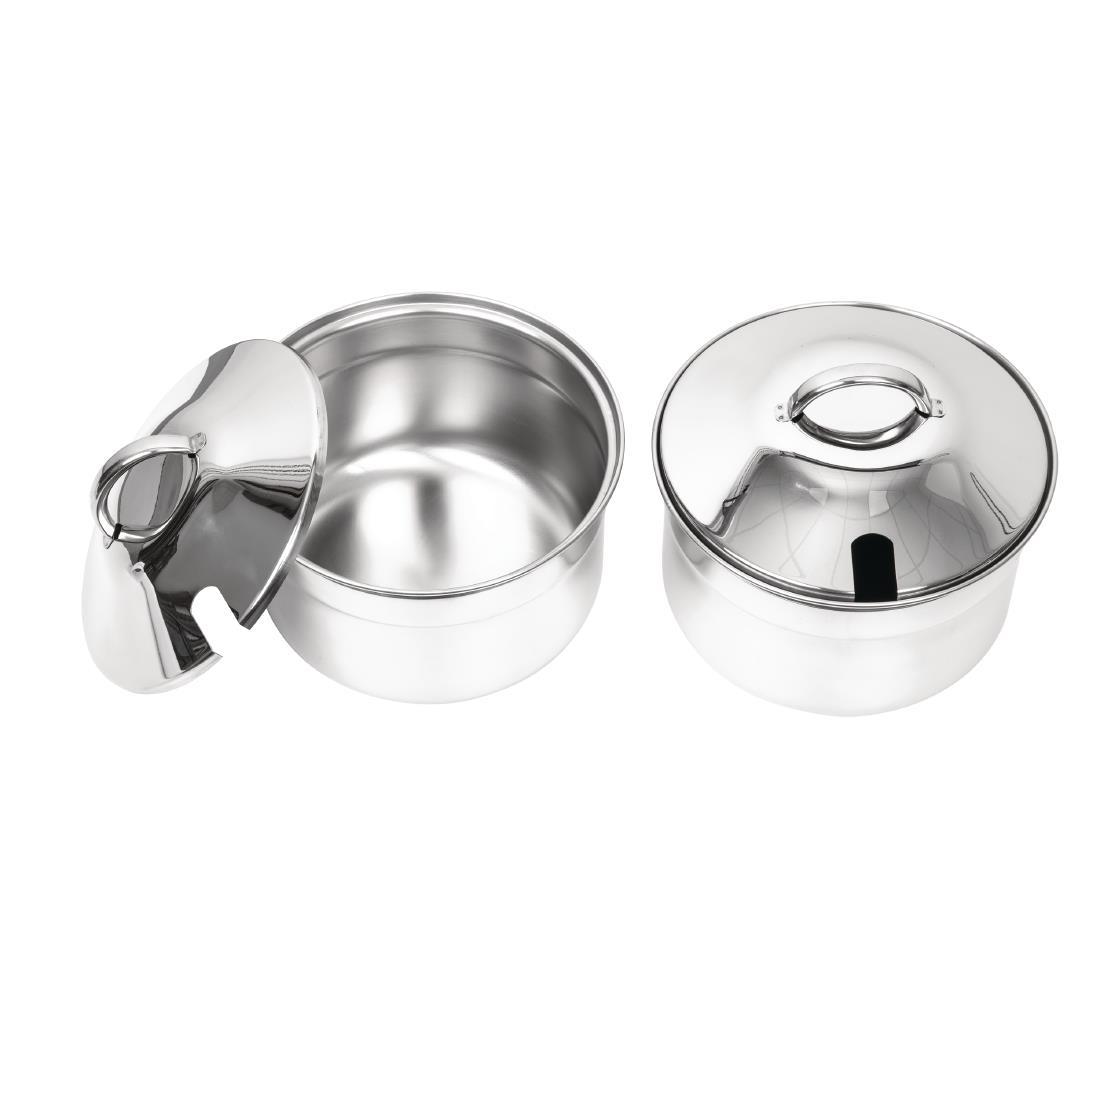 Bain Marie Set for Chafing Dish - CB723  - 4